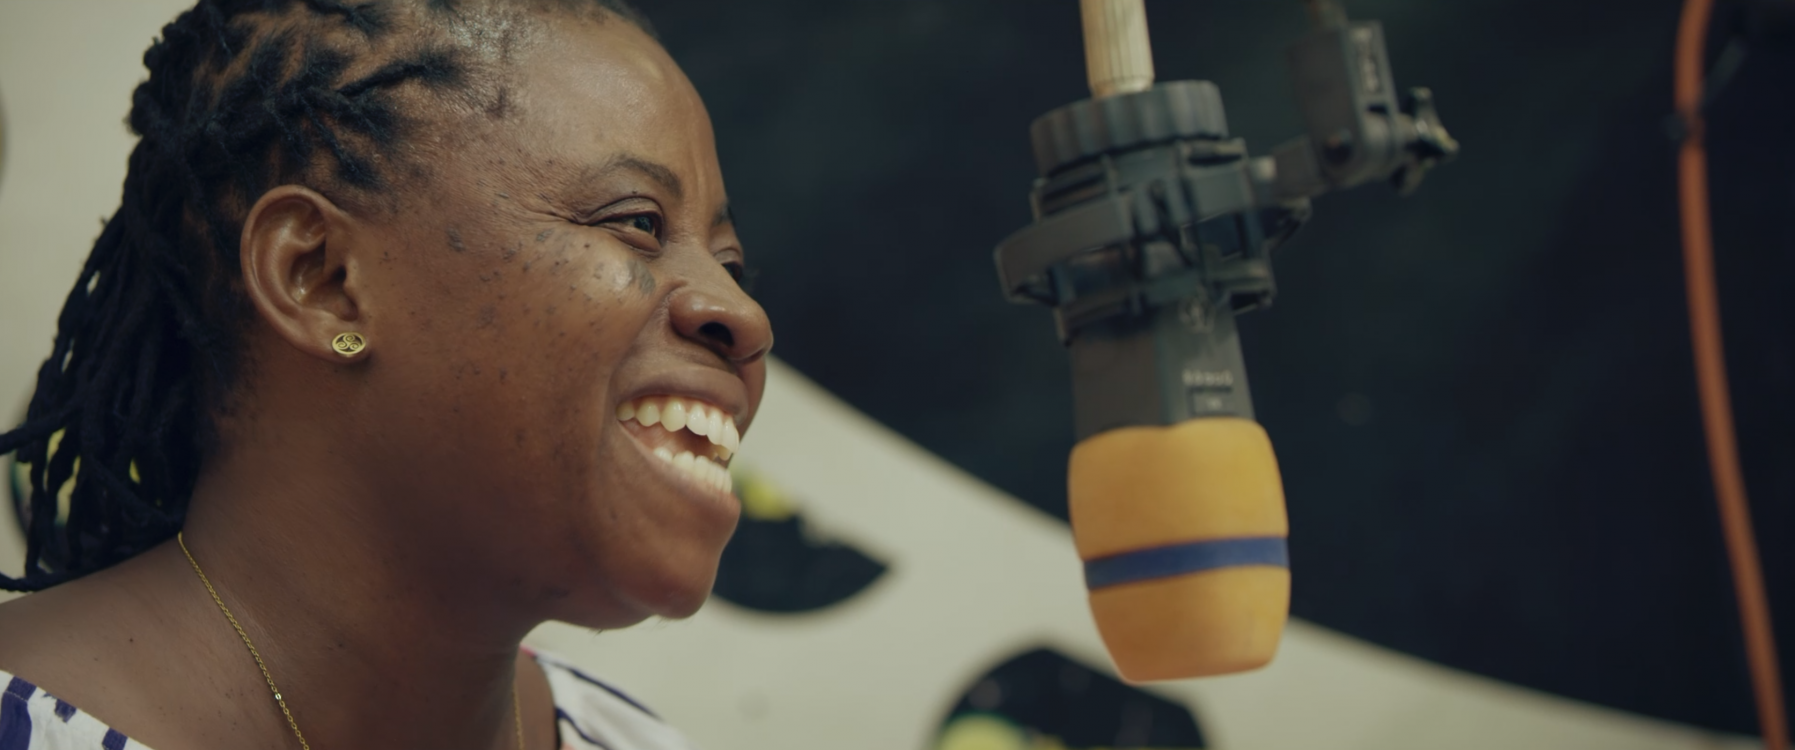 Martha Coffie, Vice President, Mental Health Society of Ghana. she speaks at a local radio station as part of the mini-film 'Stopping the Stigma'.